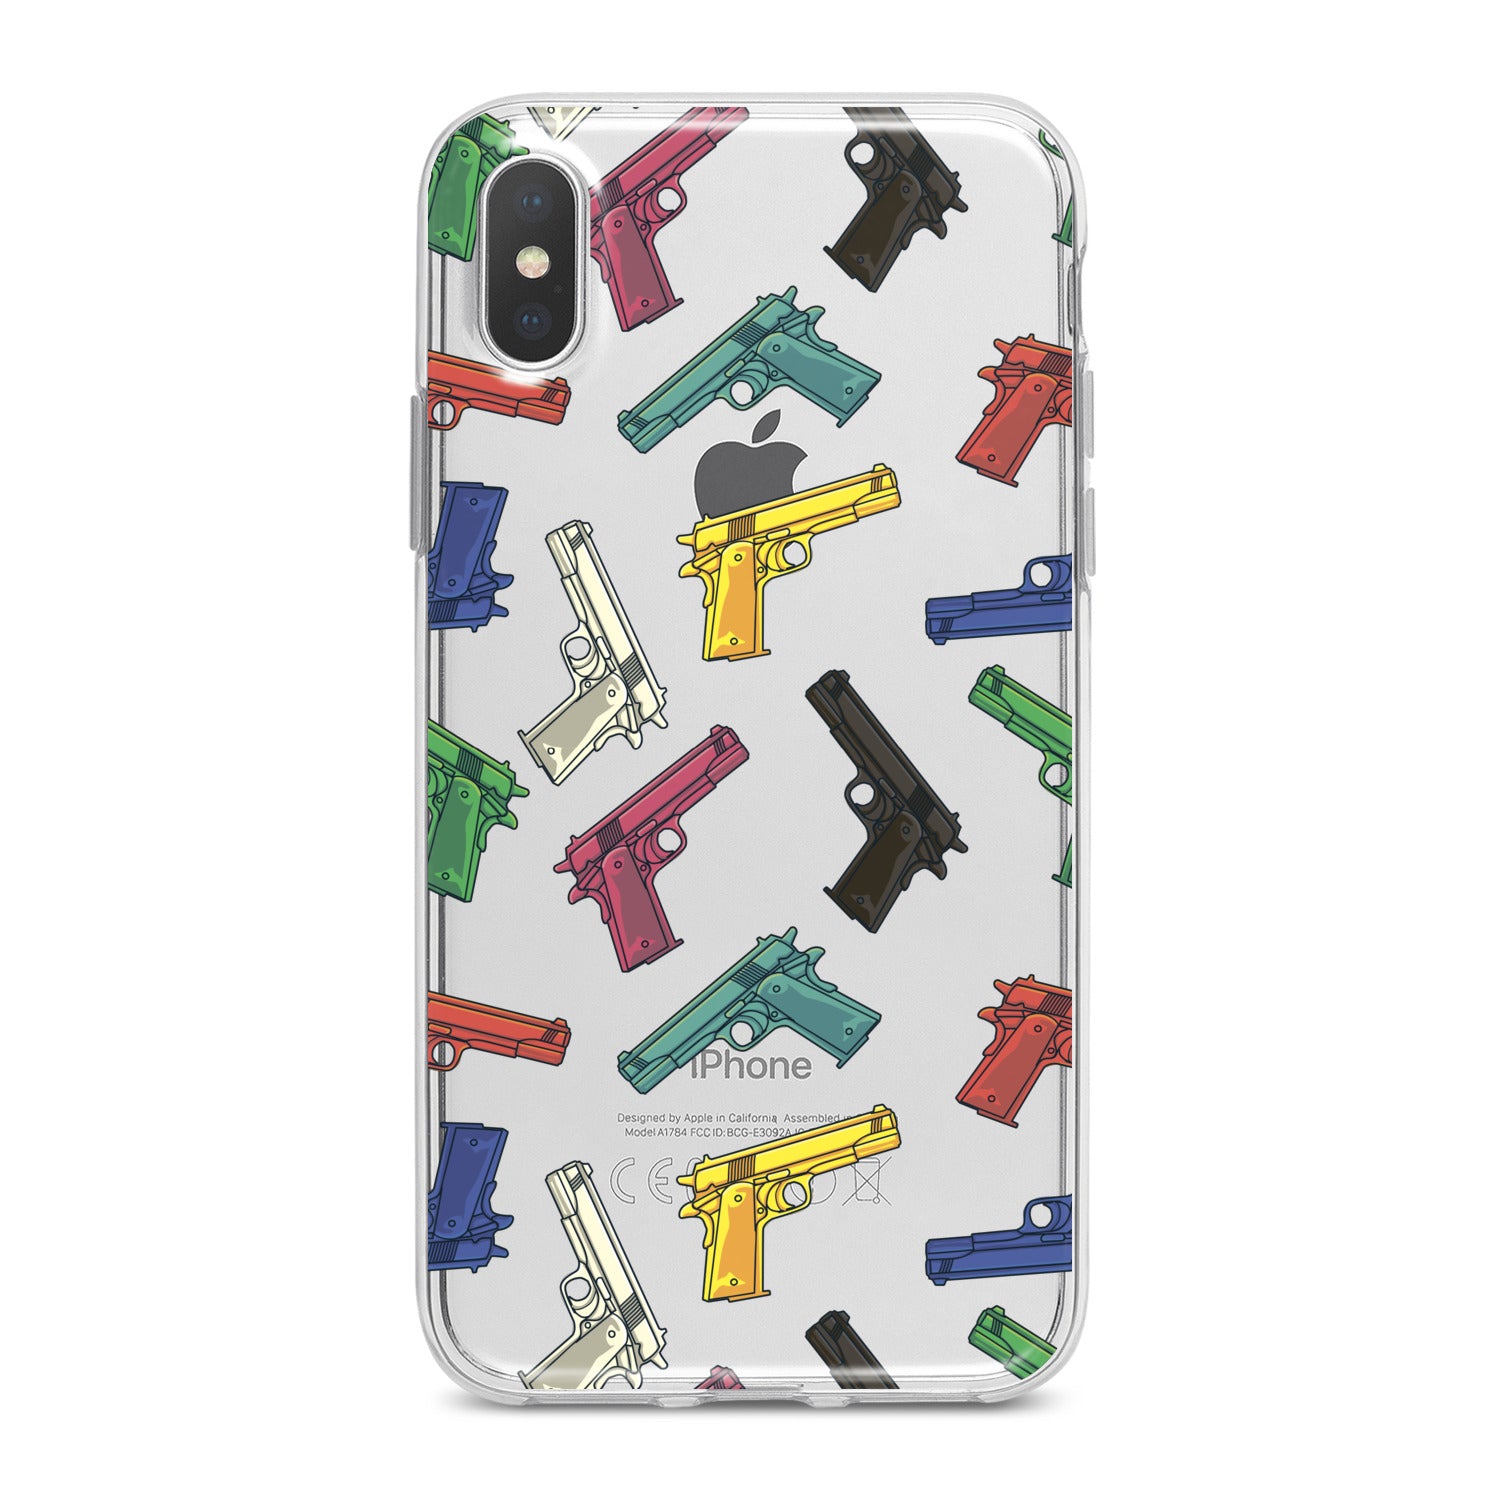 Lex Altern Colored Weapons Phone Case for your iPhone & Android phone.